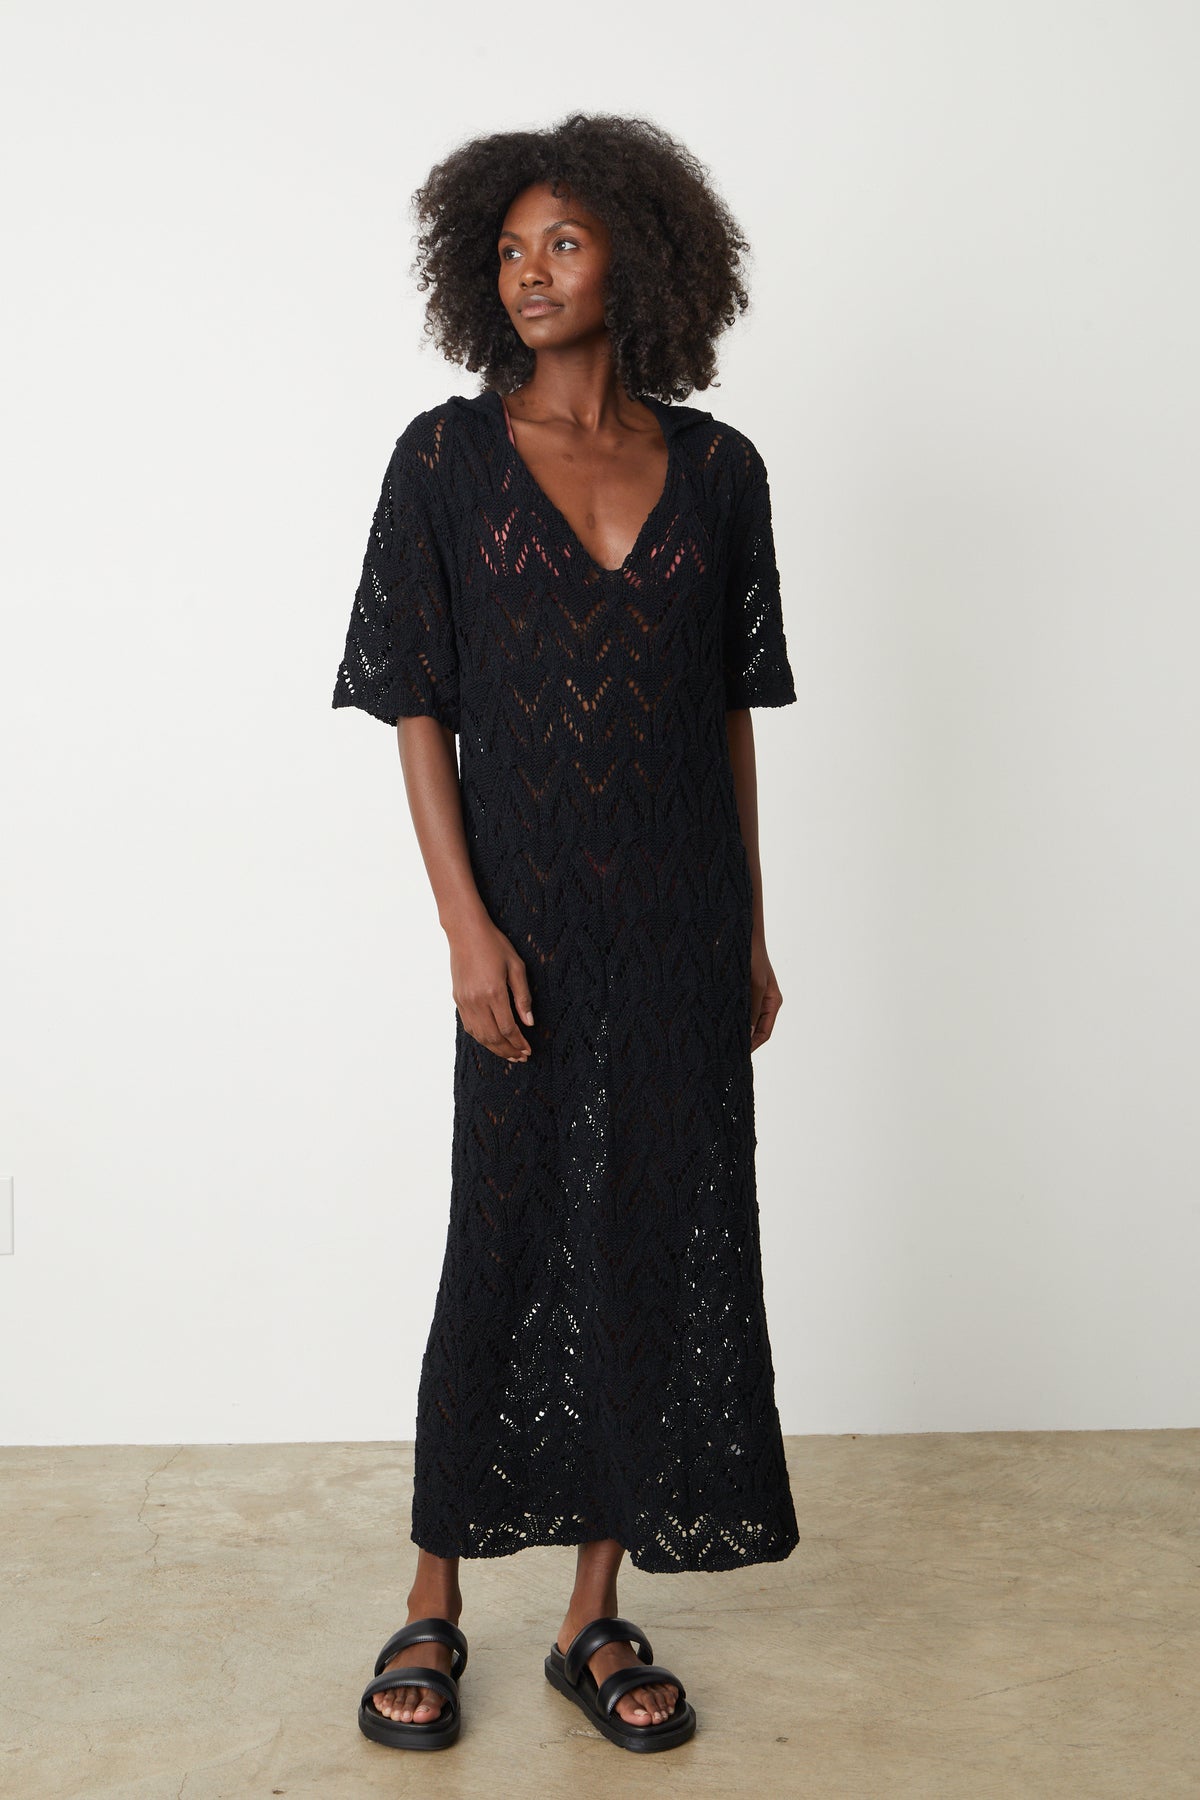   A woman wearing the Velvet by Graham & Spencer Jacqueline Crochet Stitch Maxi Dress and sandals. 